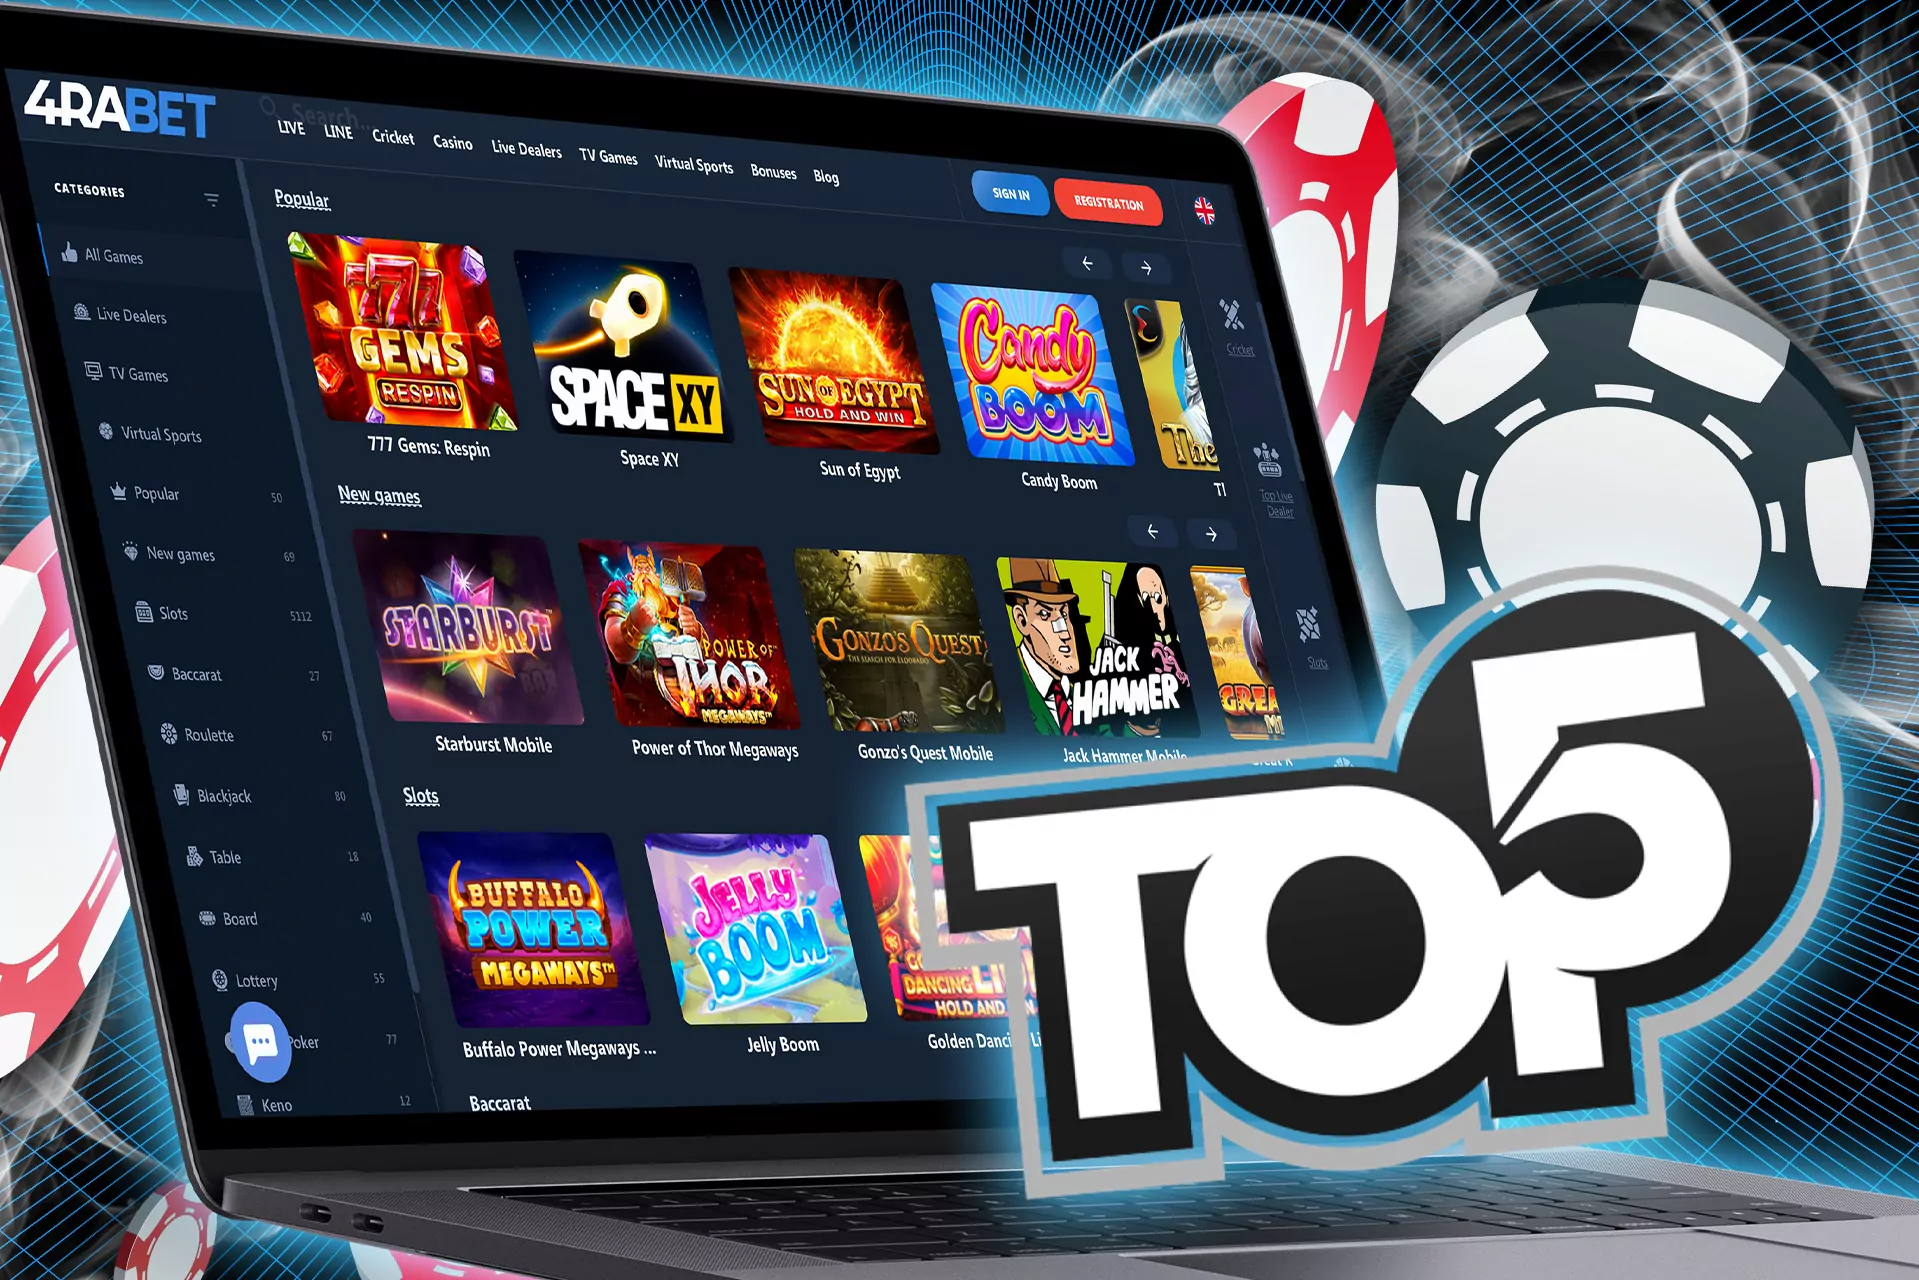 Next, we will look at the top 5 such popular games in our casino to emphasize the peculiarity of each.